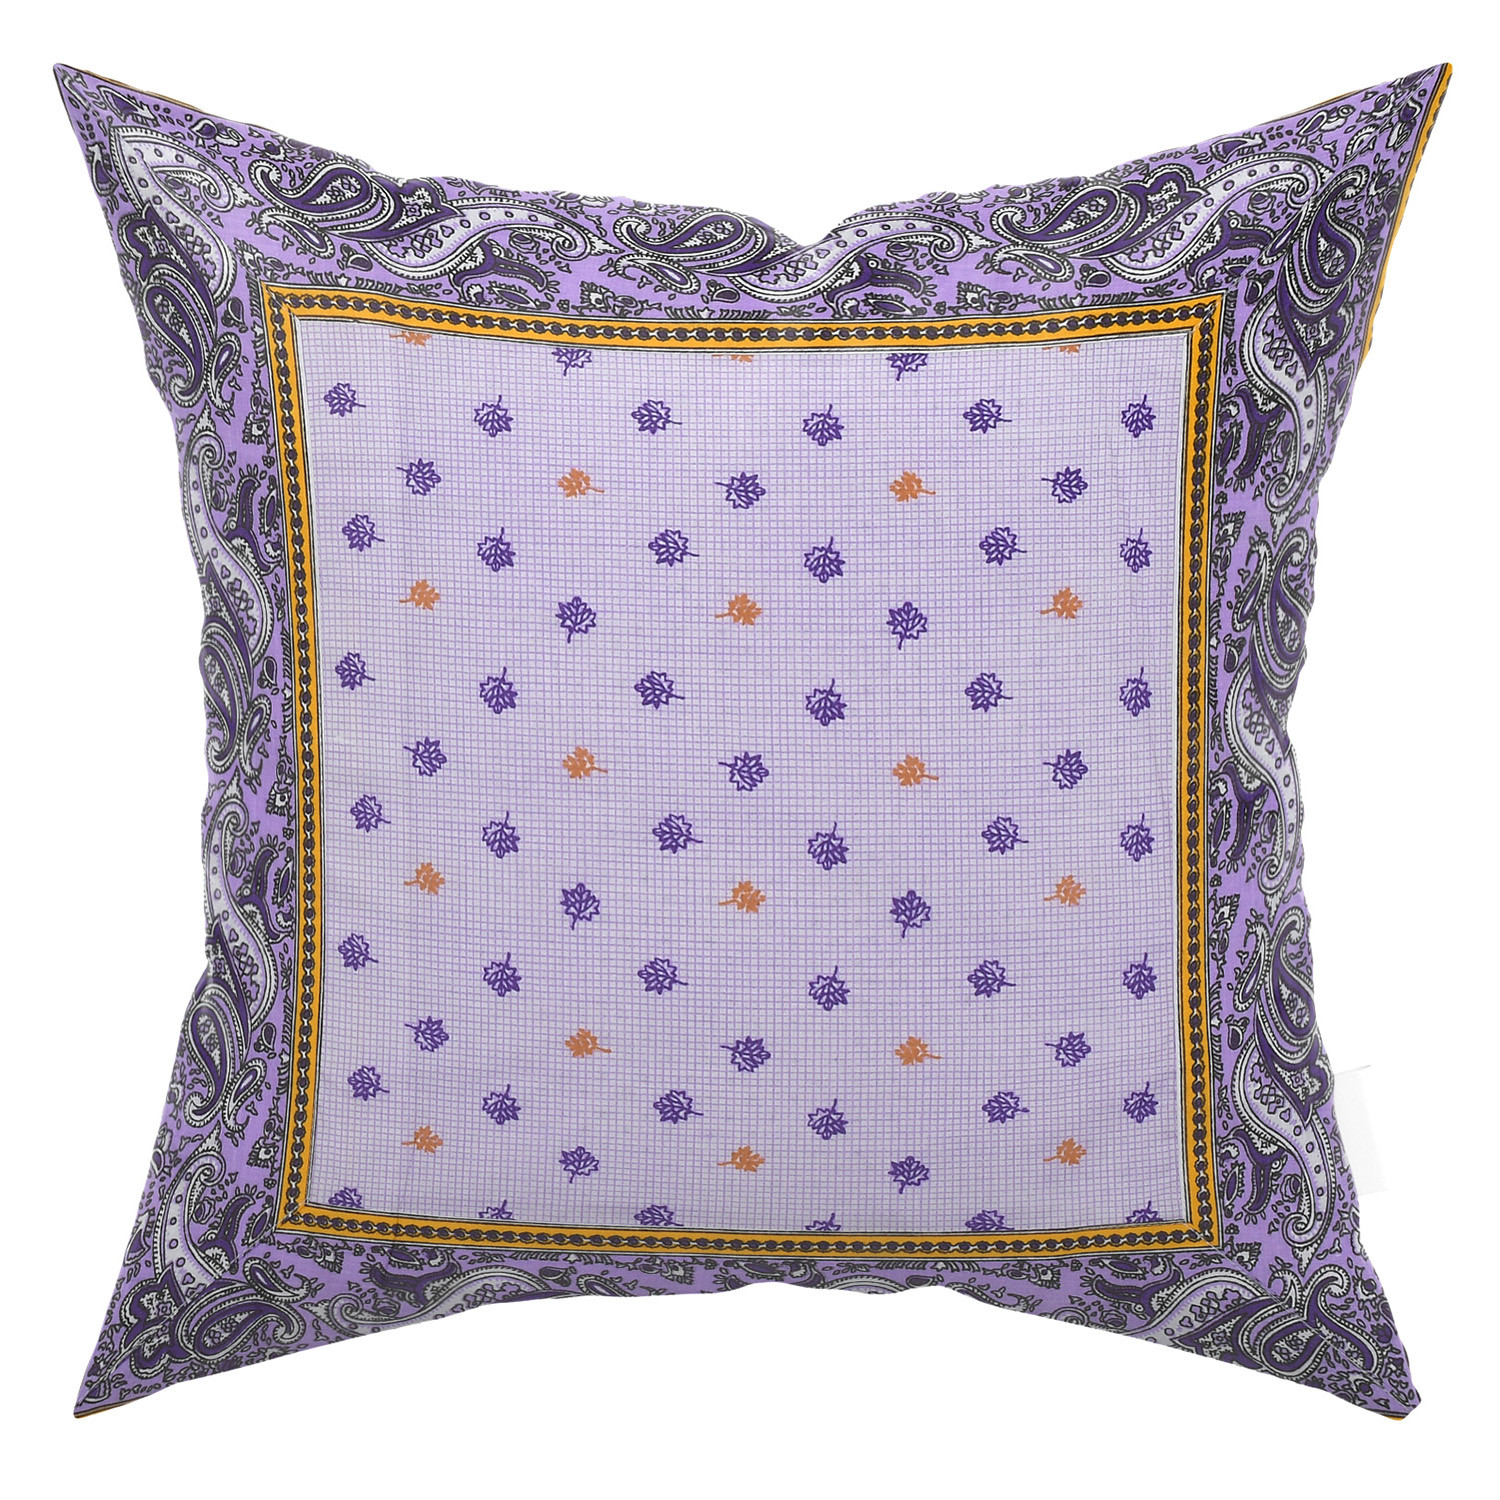 Kuber Industries Cushion Cover|Ractangle Cushion Covers|Sofa Cushion Covers|Cushion Covers 16 inch x 16 inch|Cushion Cover Set of 5|(Purple)